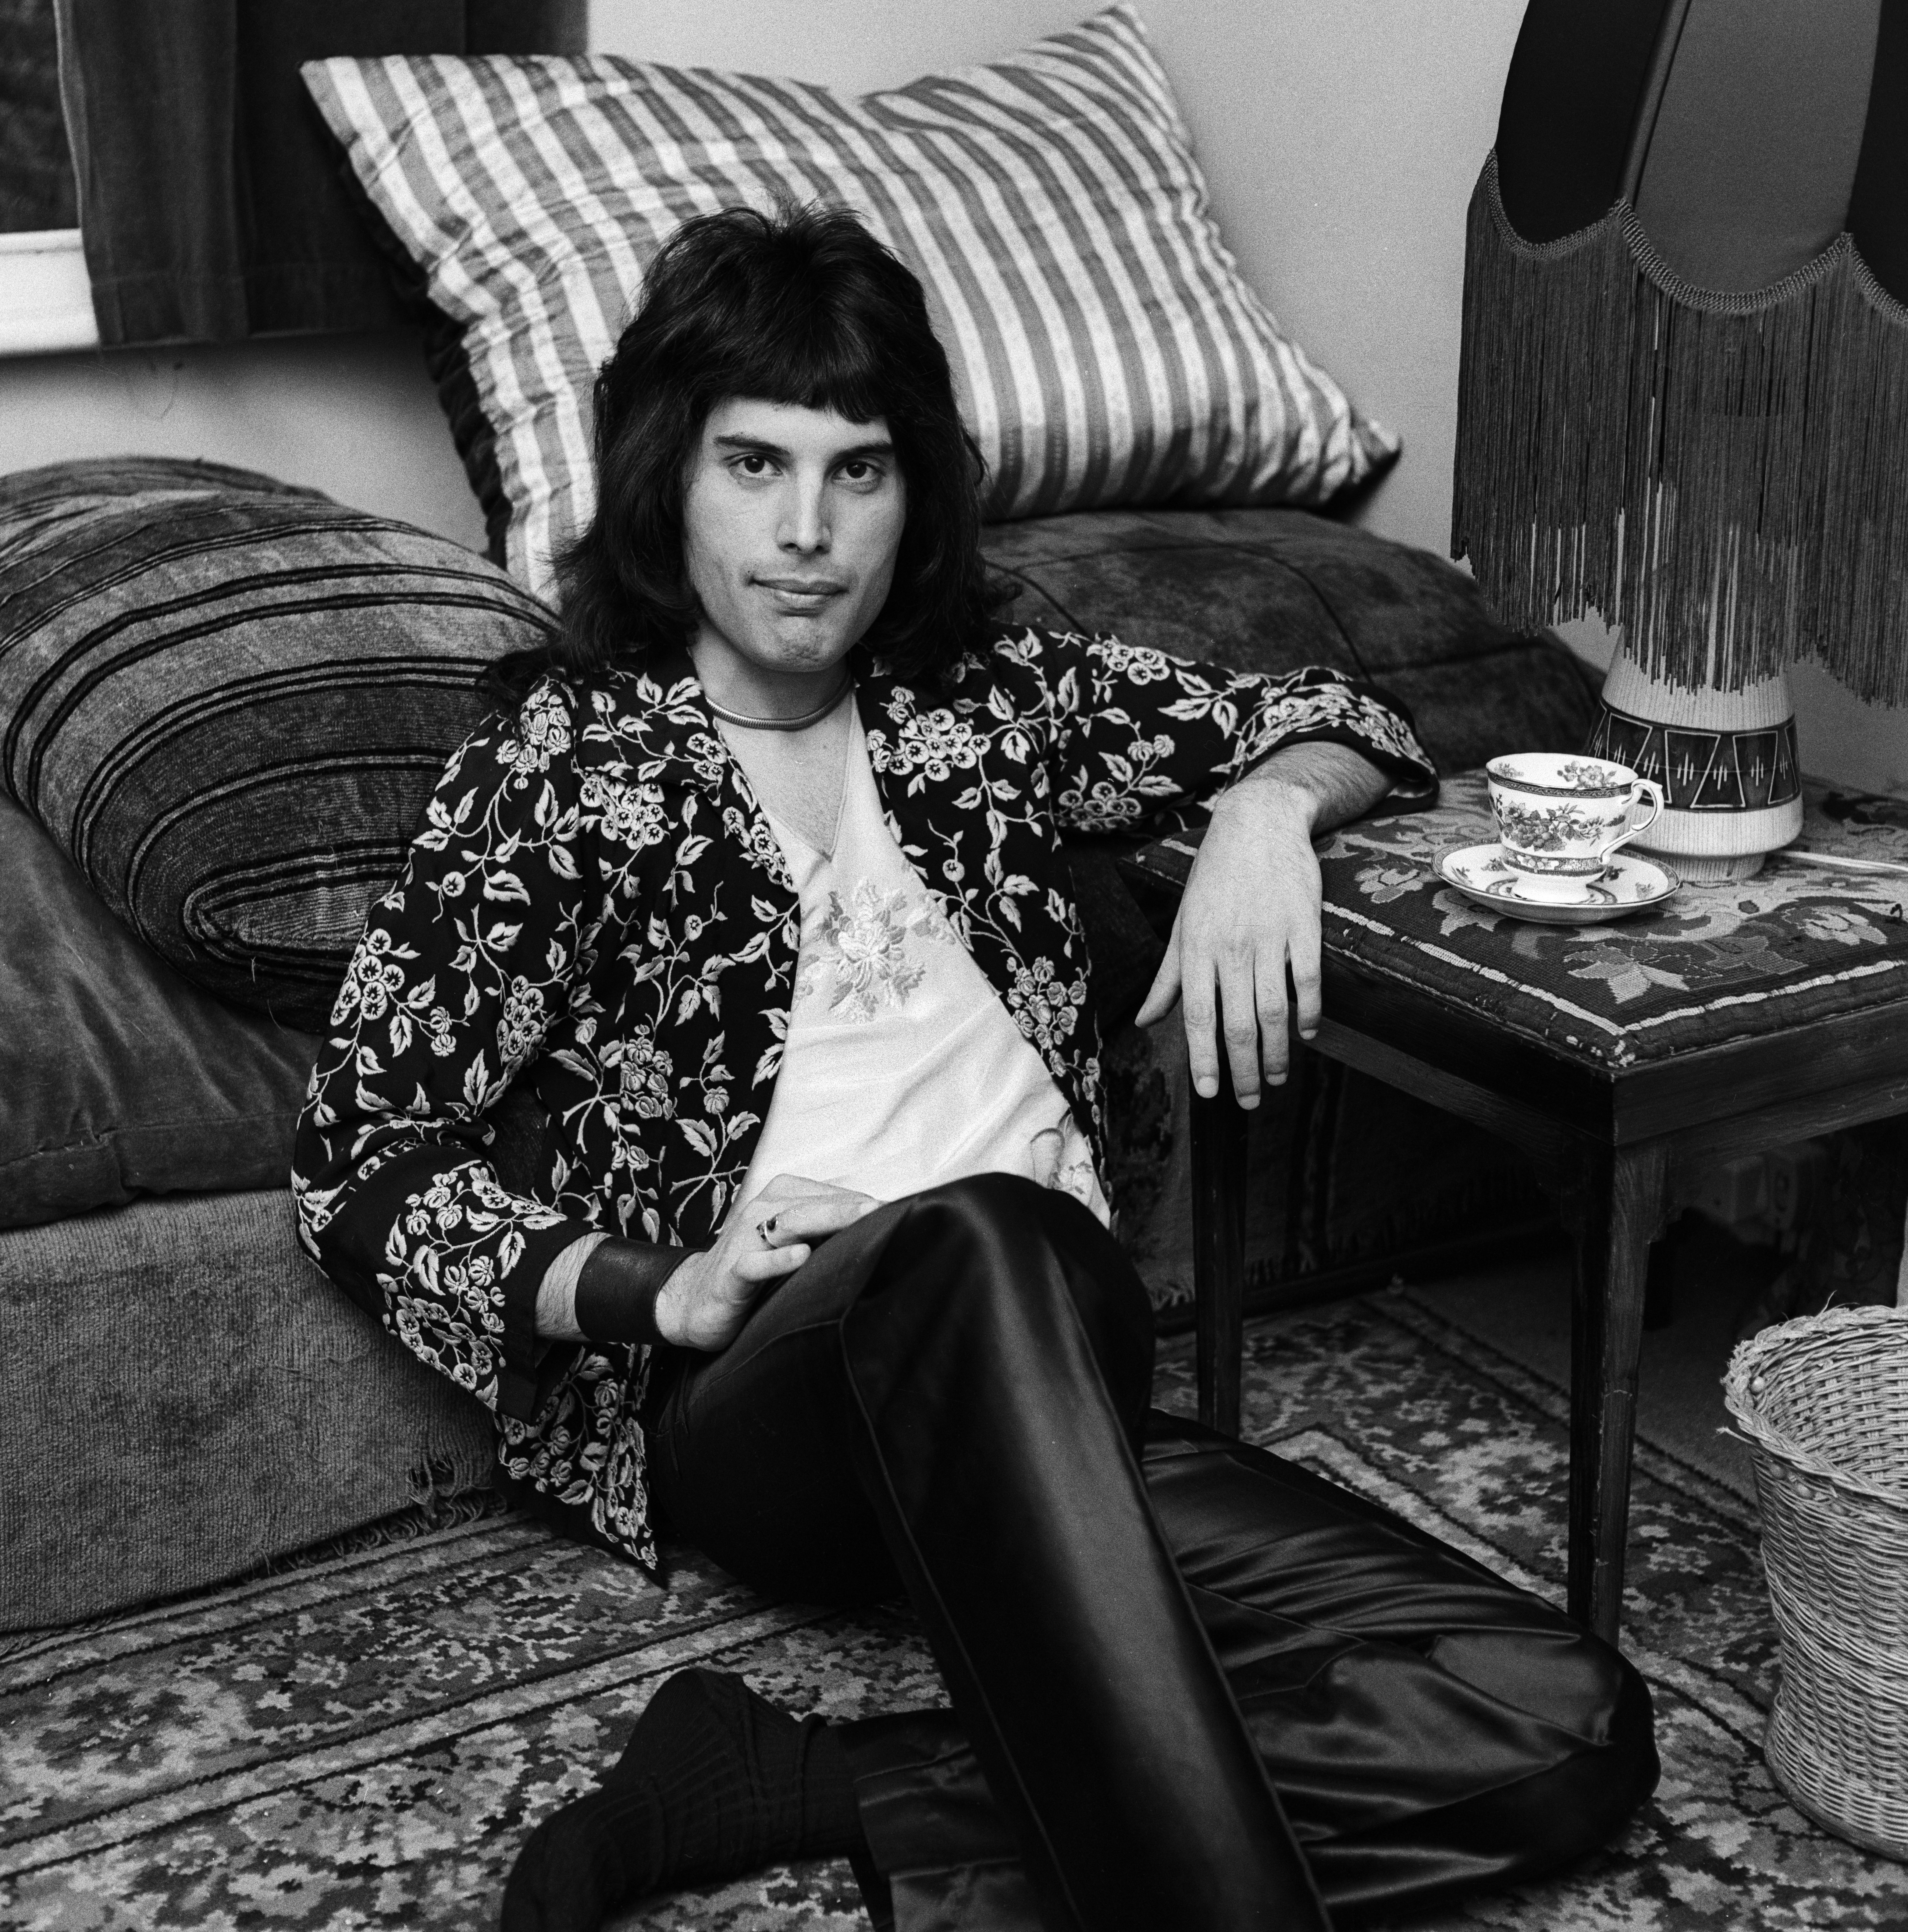 British singer and songwriter Freddie Mercury, lead vocalist of the rock band Queen. August, 1973. | Photo: GettyImages